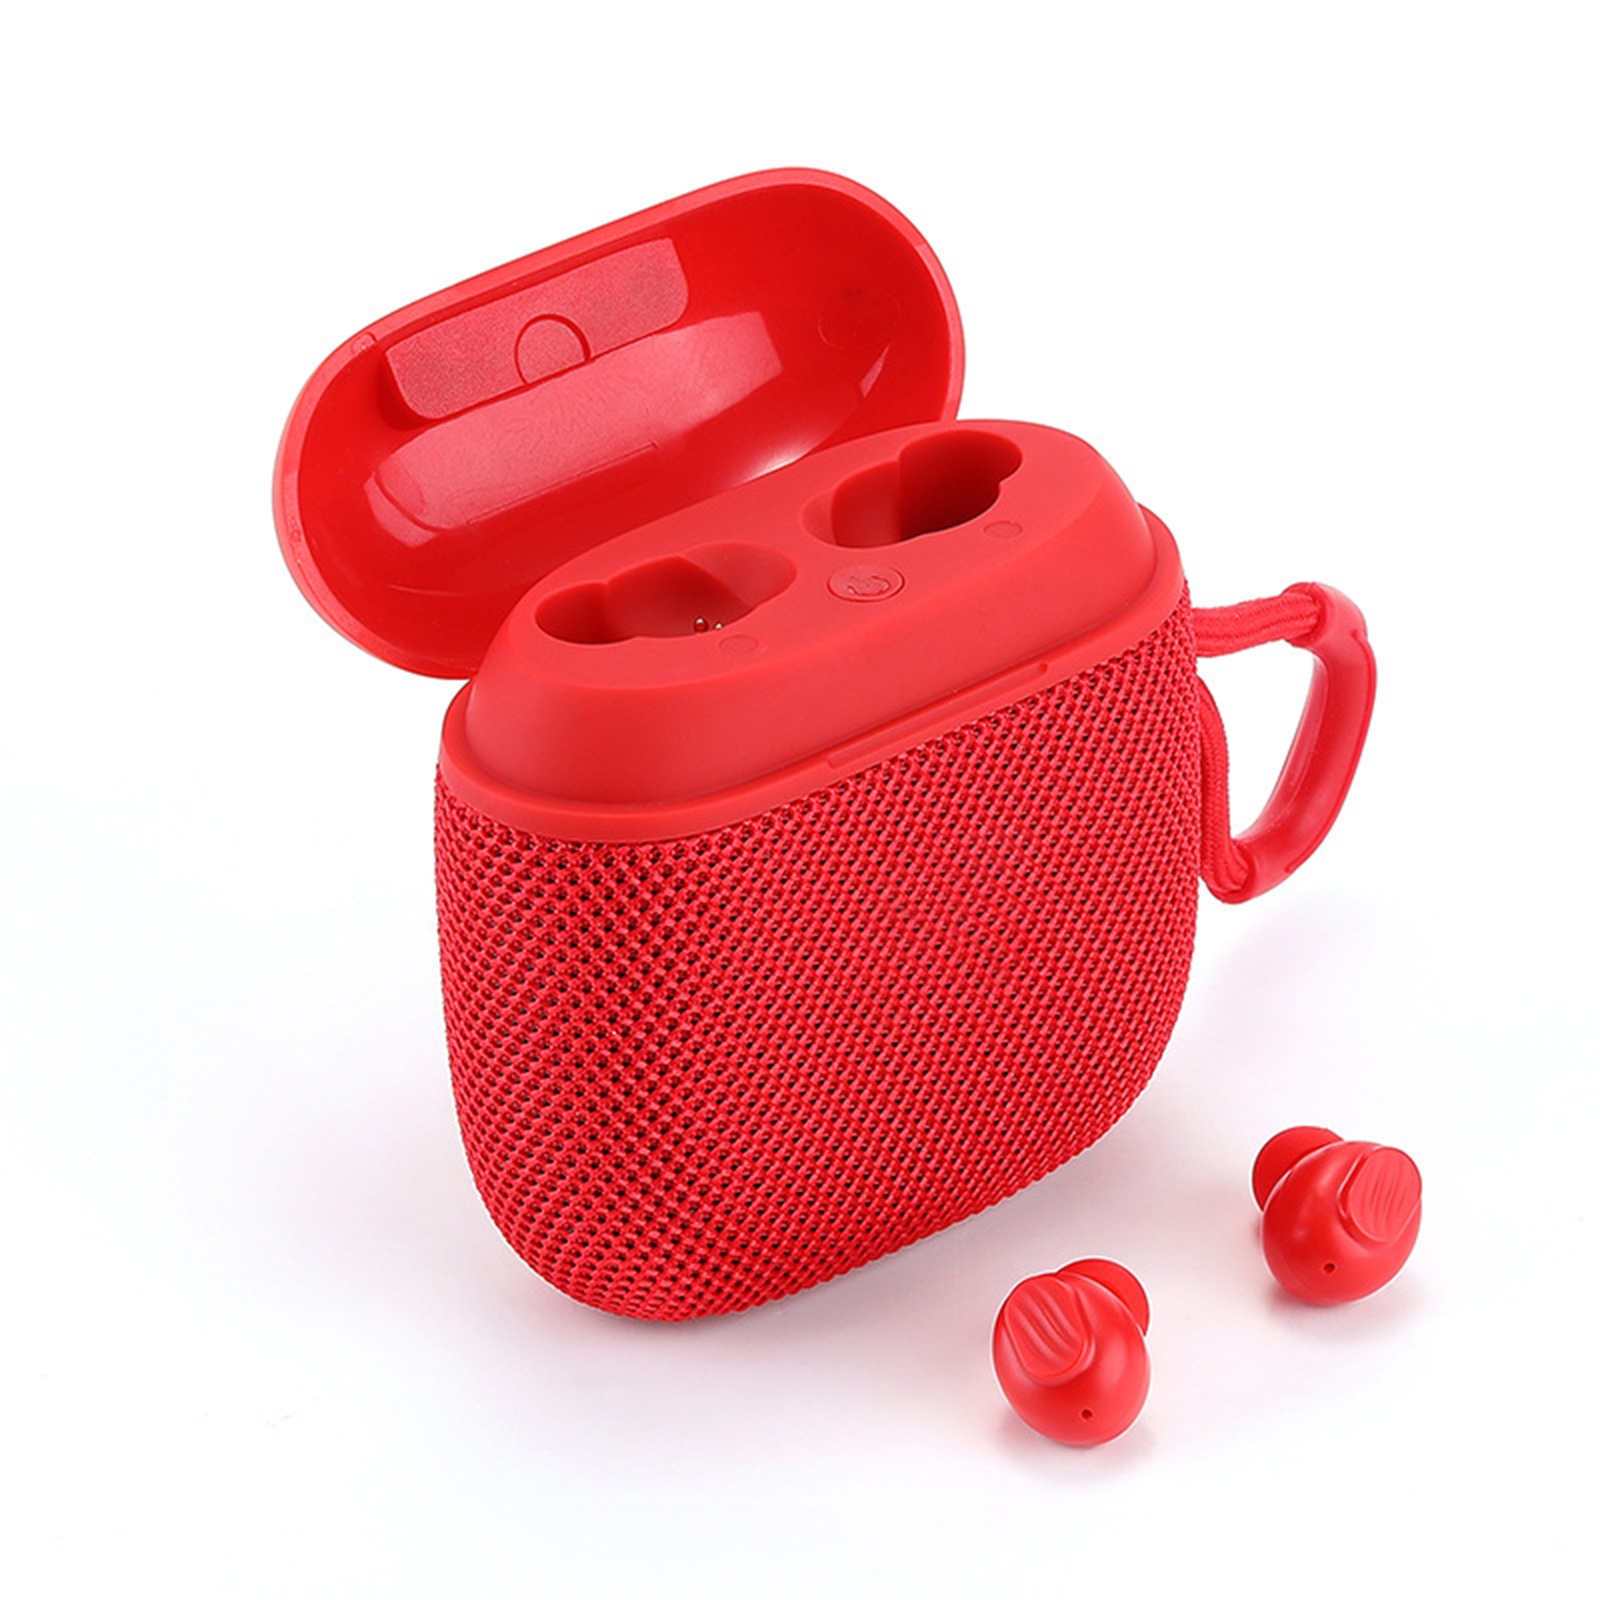 TG809 2 In 1 Portable Wireless Speaker Earbuds Combo Mini Surround Stereo Sound With Earbuds For Home Party Outdoor Travel